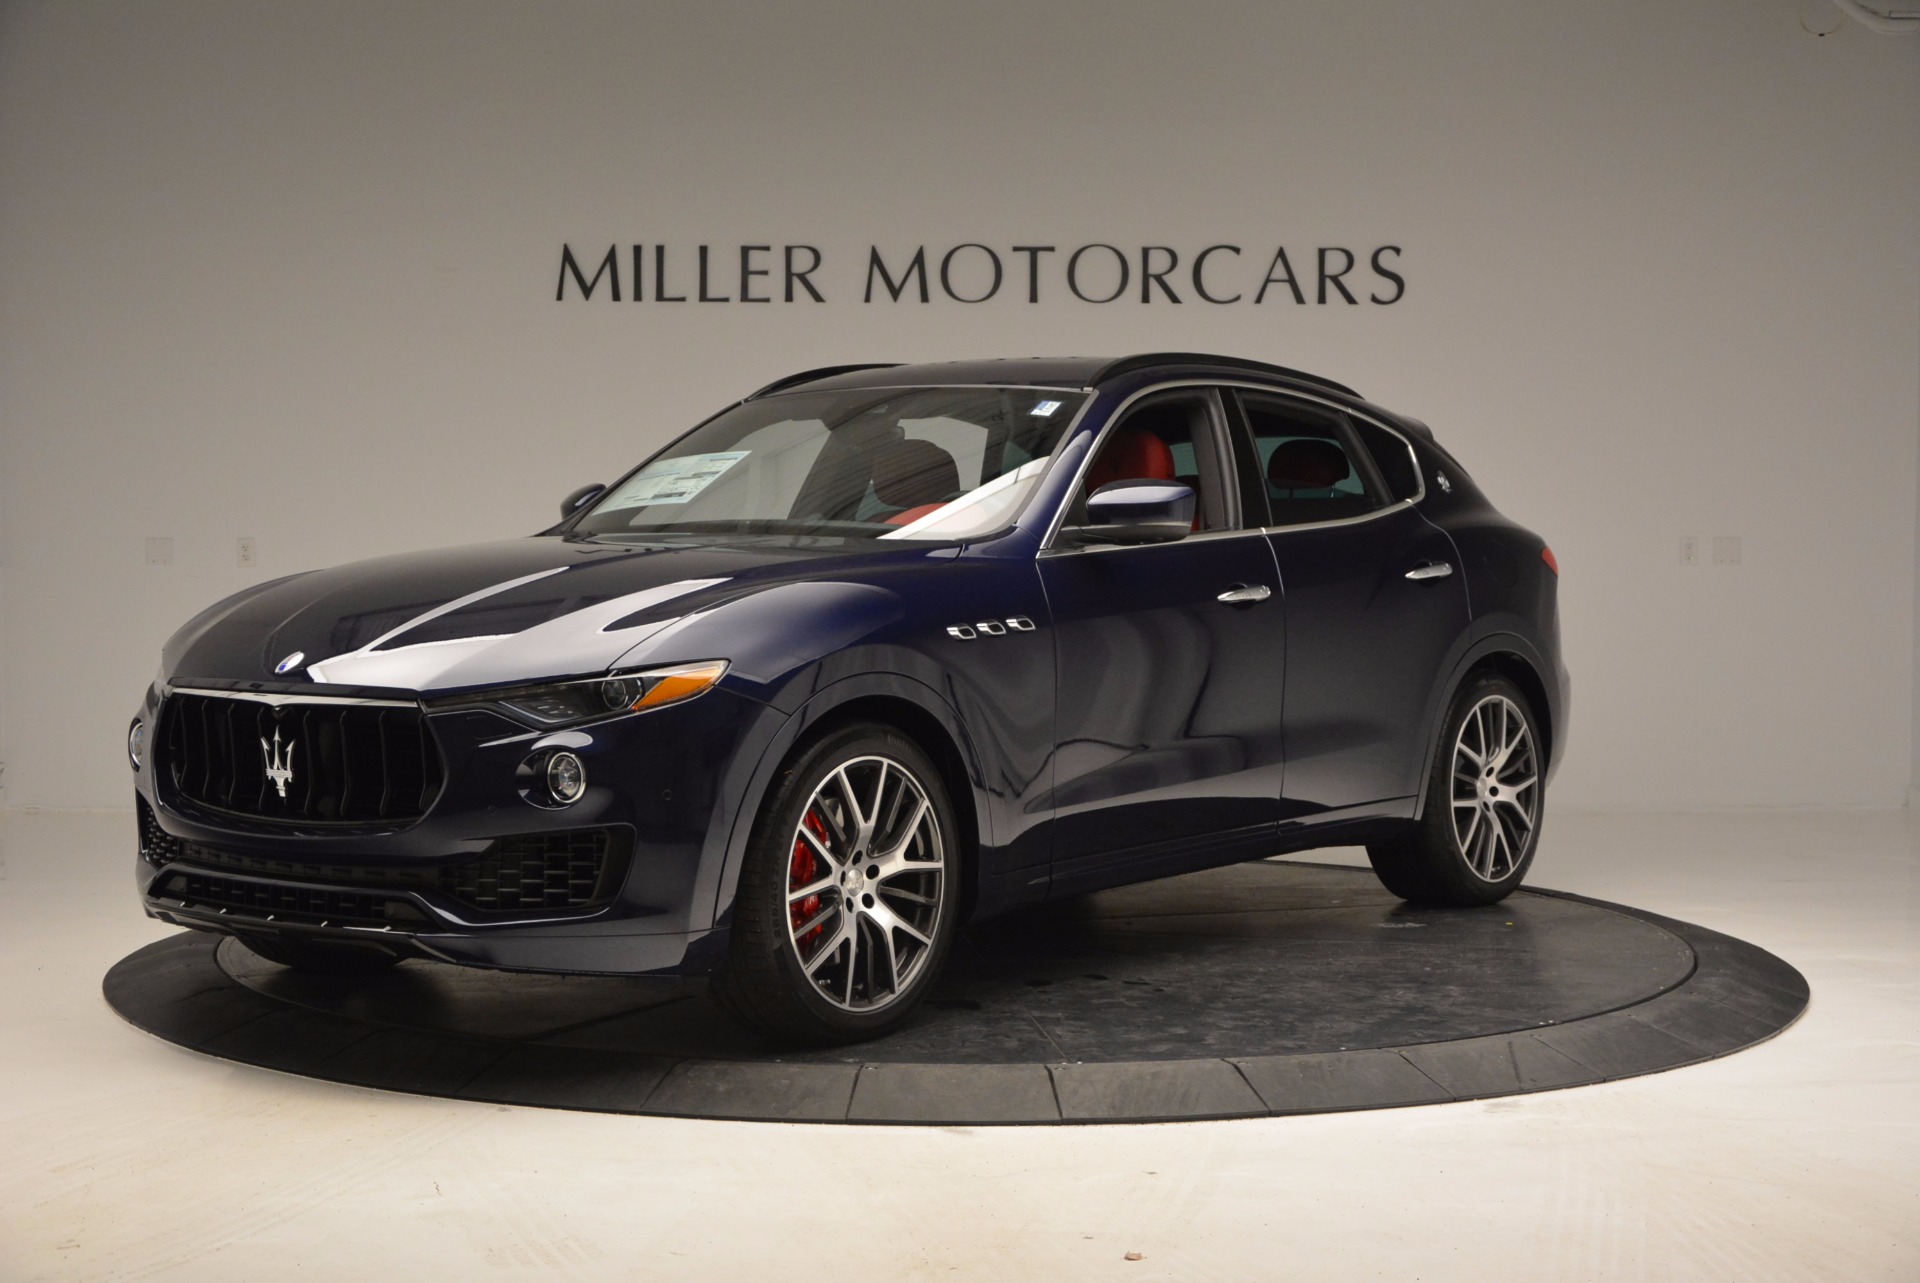 New 2017 Maserati Levante S Q4 for sale Sold at Rolls-Royce Motor Cars Greenwich in Greenwich CT 06830 1